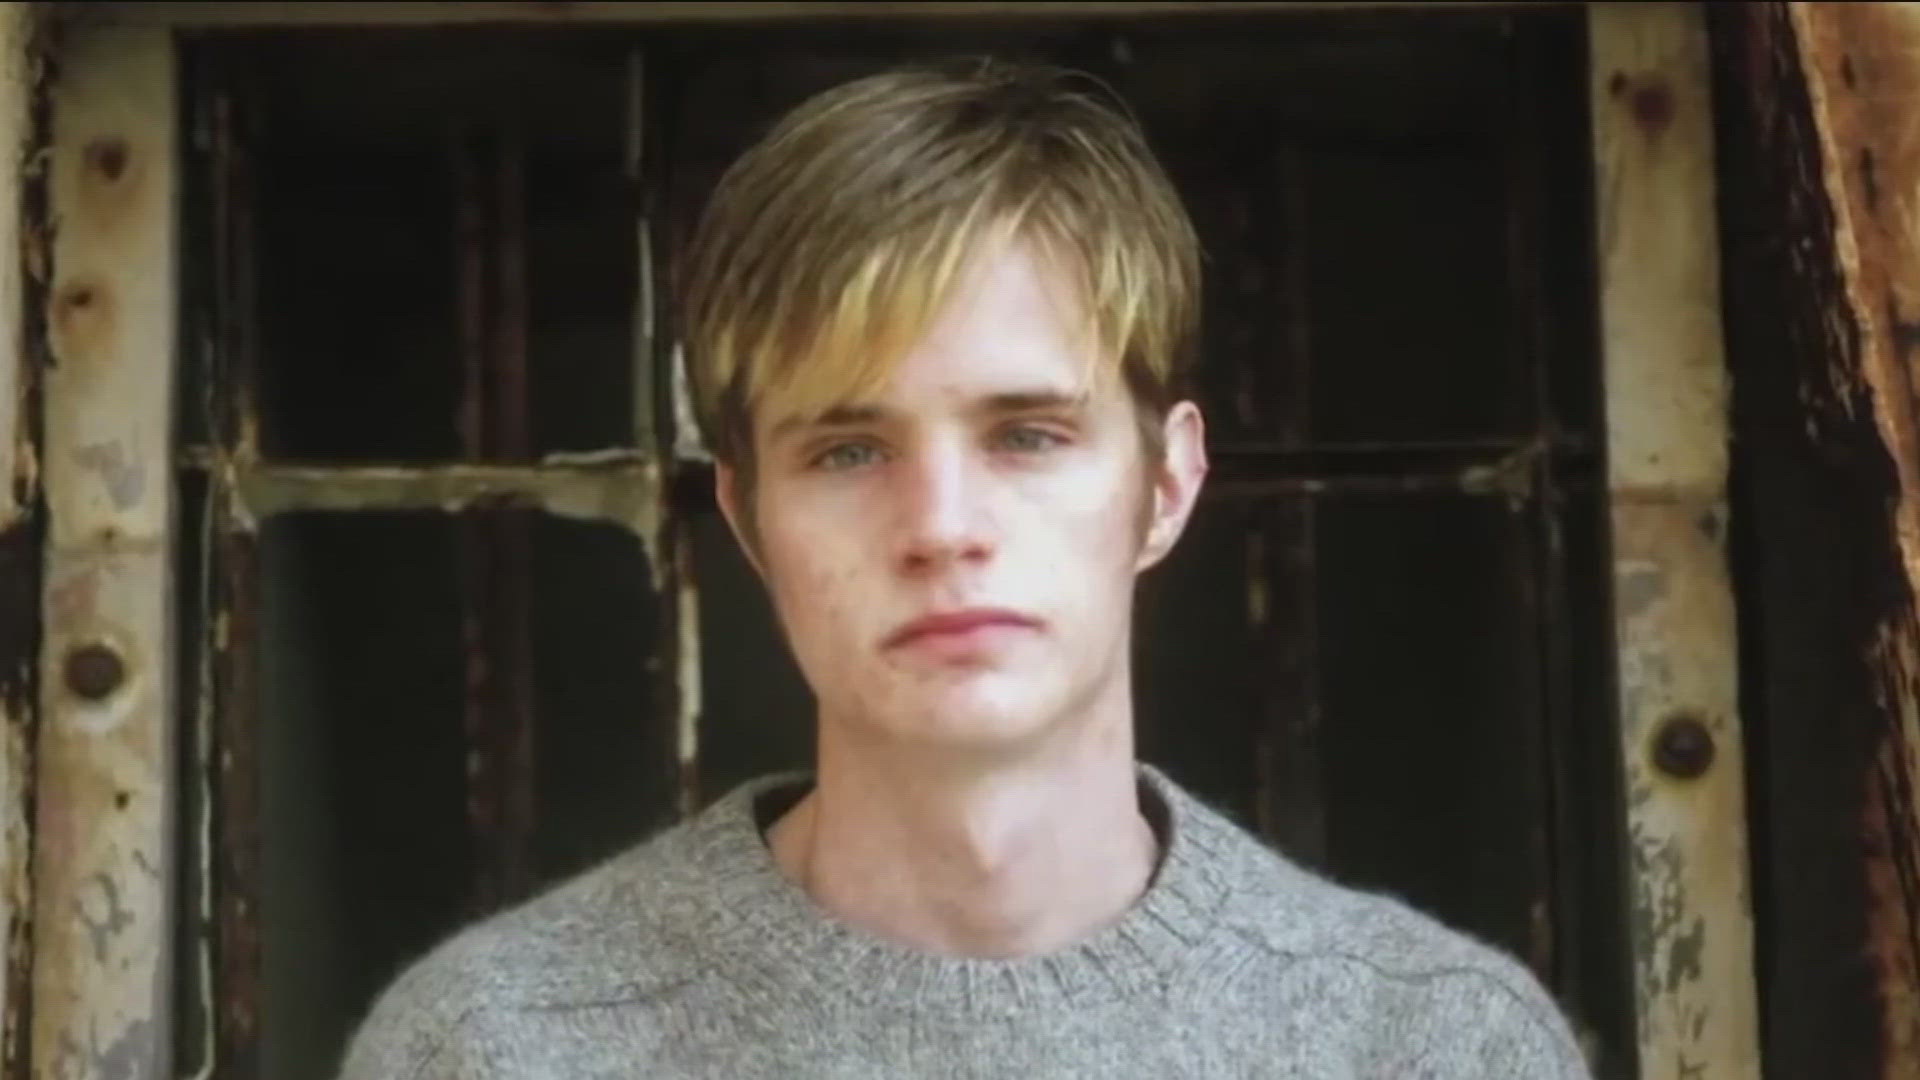 Matthew Shepard was 21 years old when he was kidnapped, beaten and left to die in 1998.